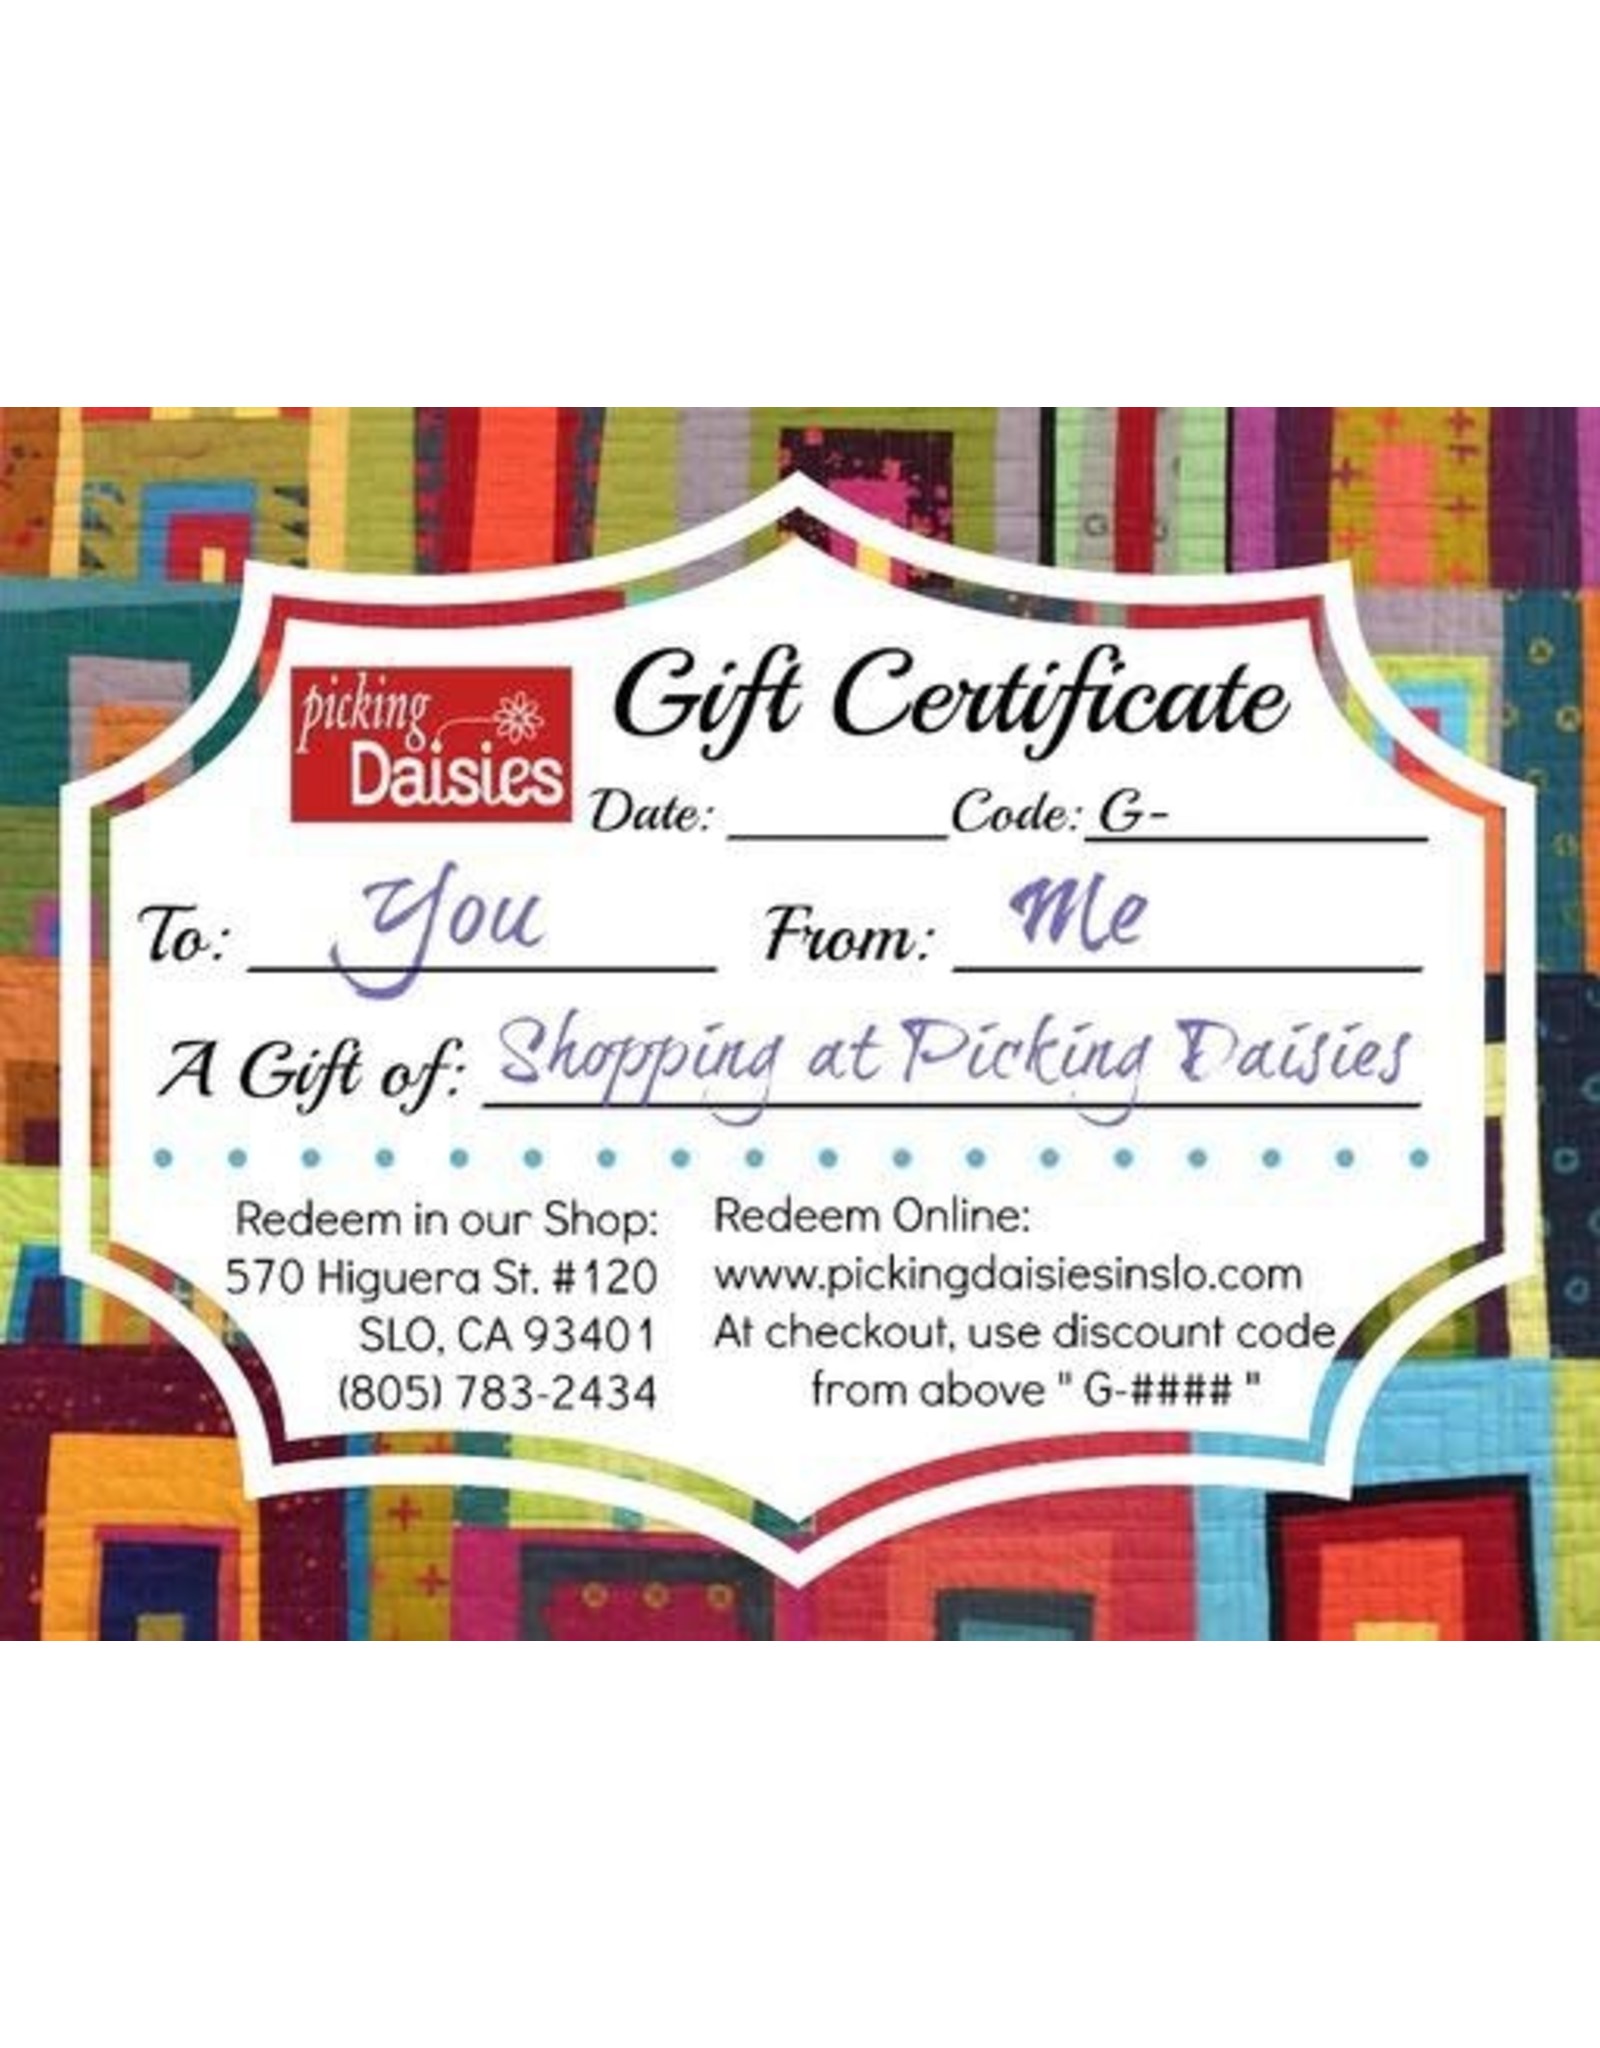 PD Gift Card - $25